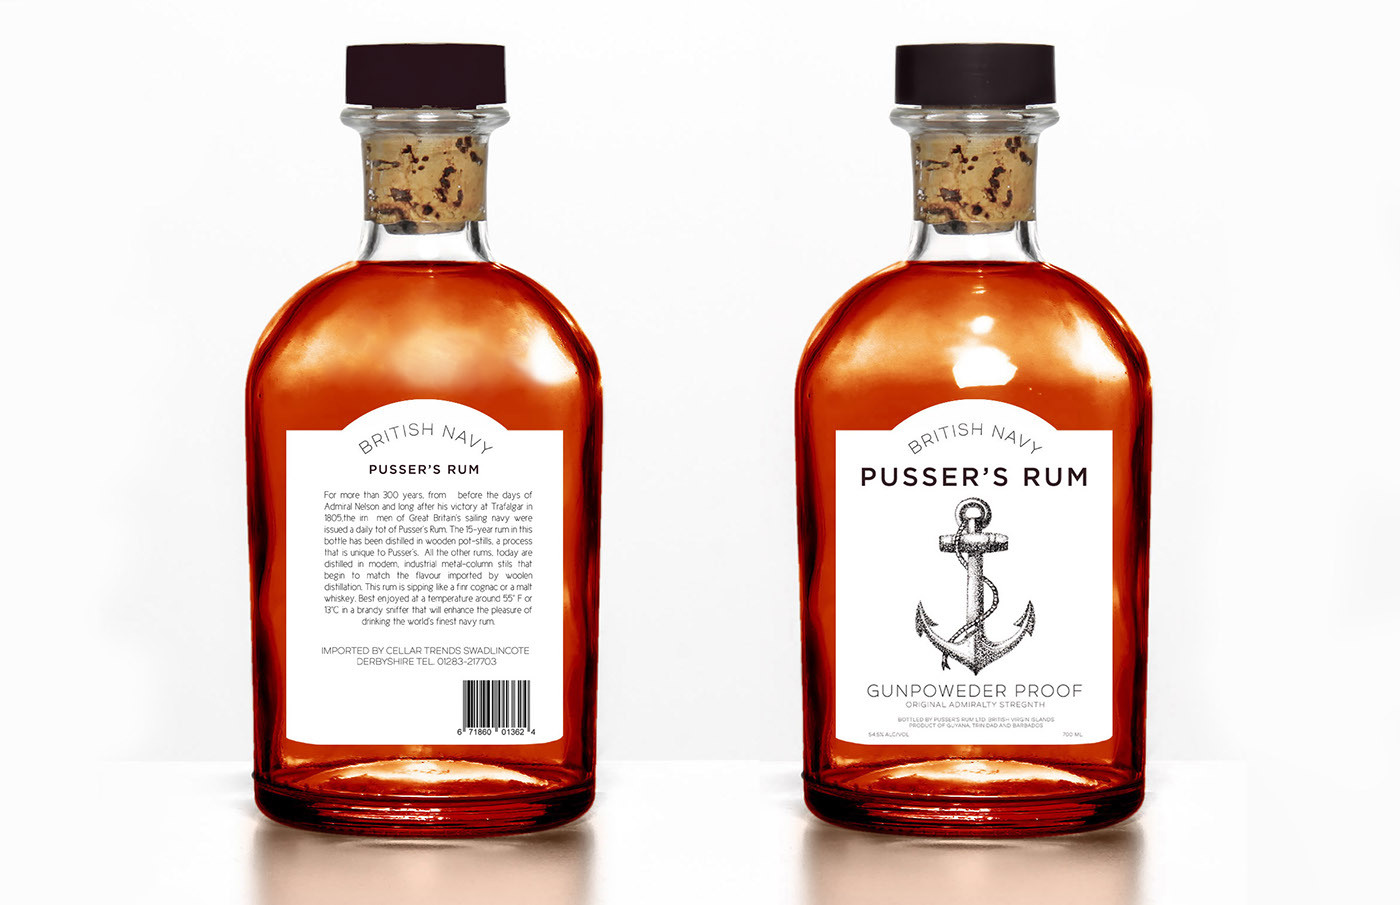 Pusser's Rum Packaging Redesign by Vasiliki Zotou - Creative Work - $i